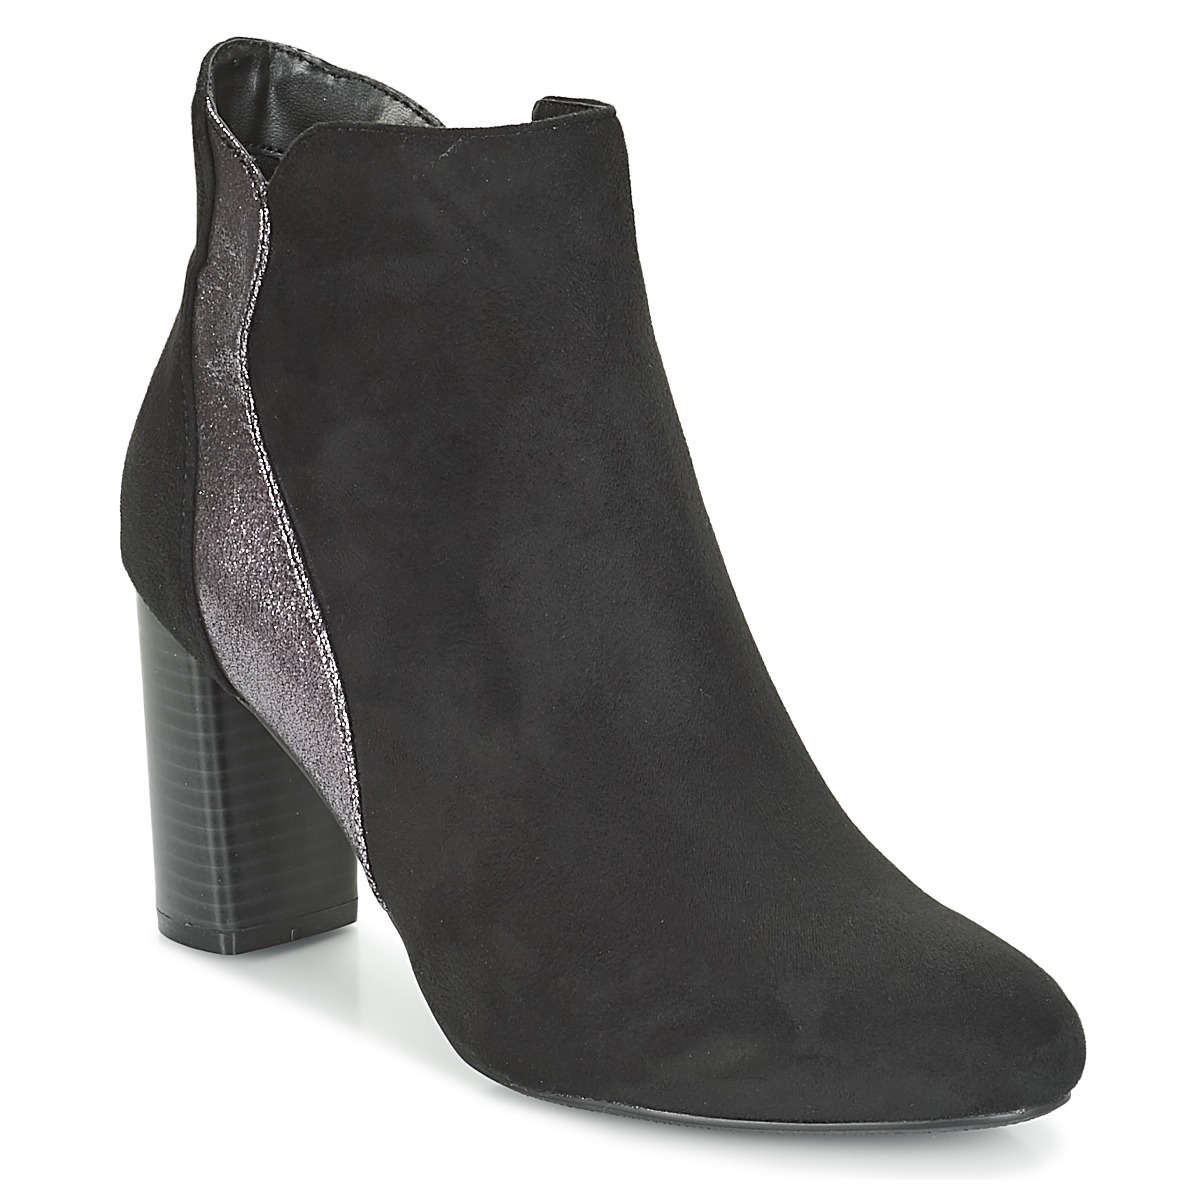 Spartoo - Ladies Ankle Boots in Black by Moony Mood GOOFASH